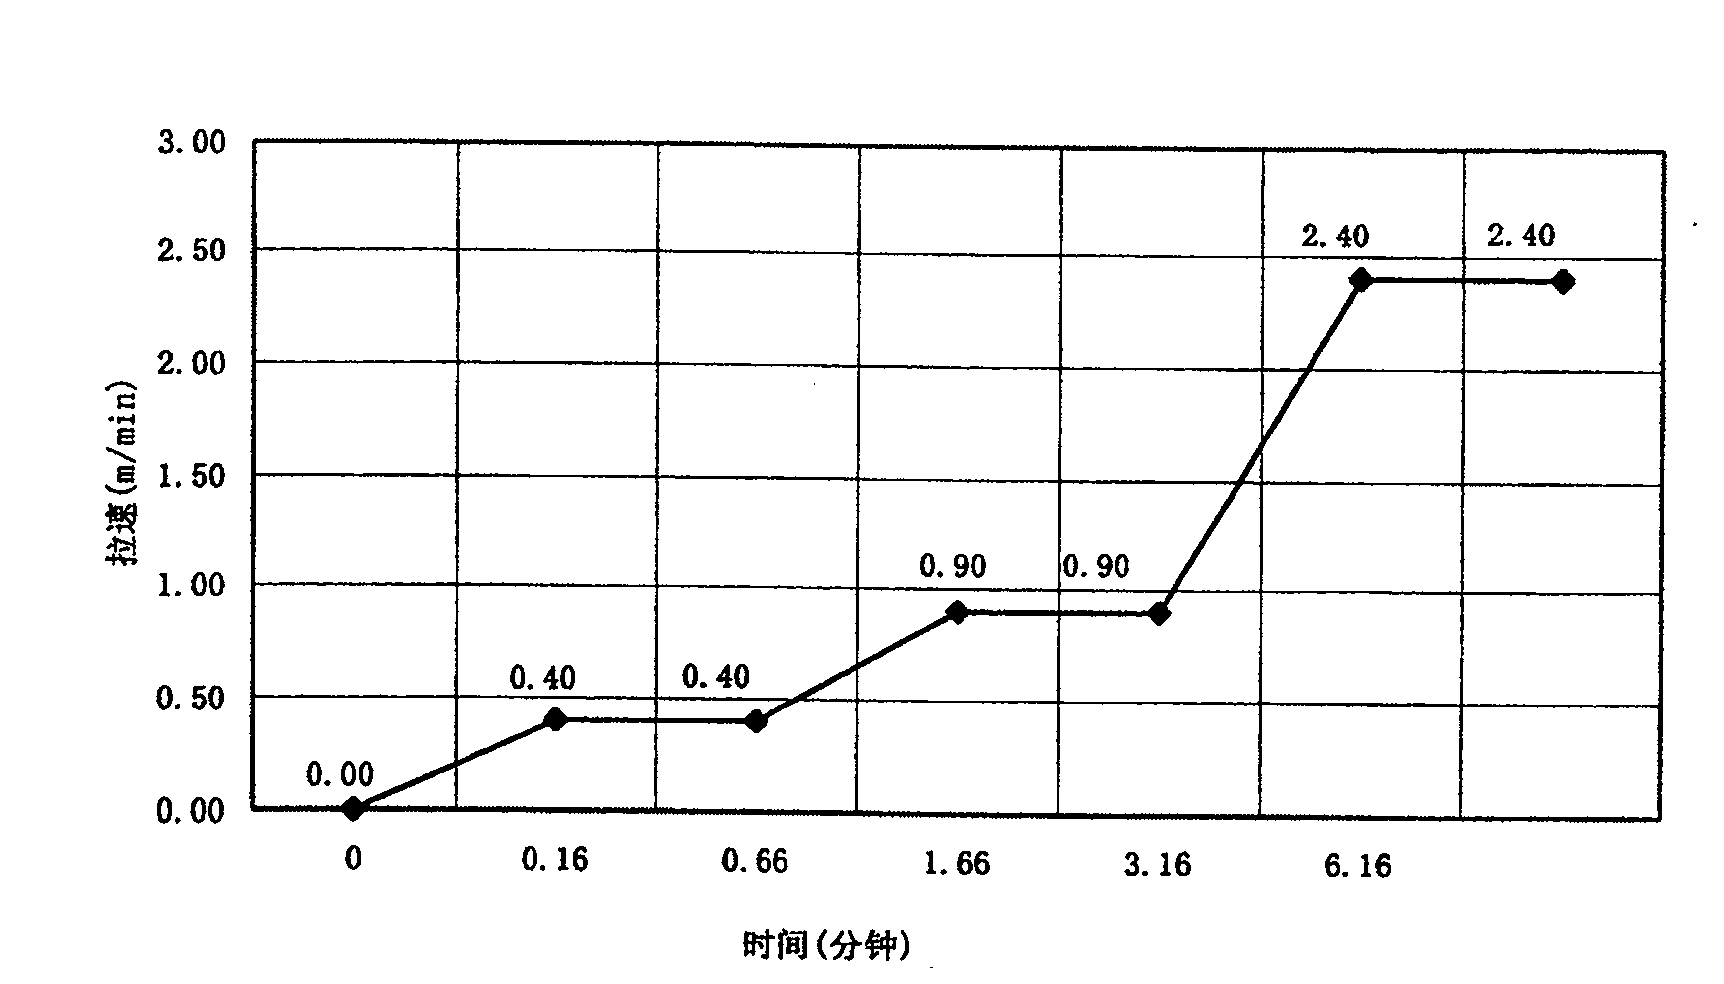 Plate blank continuous casting off-line emulation system under secondary cooling and dynamic soft reduction